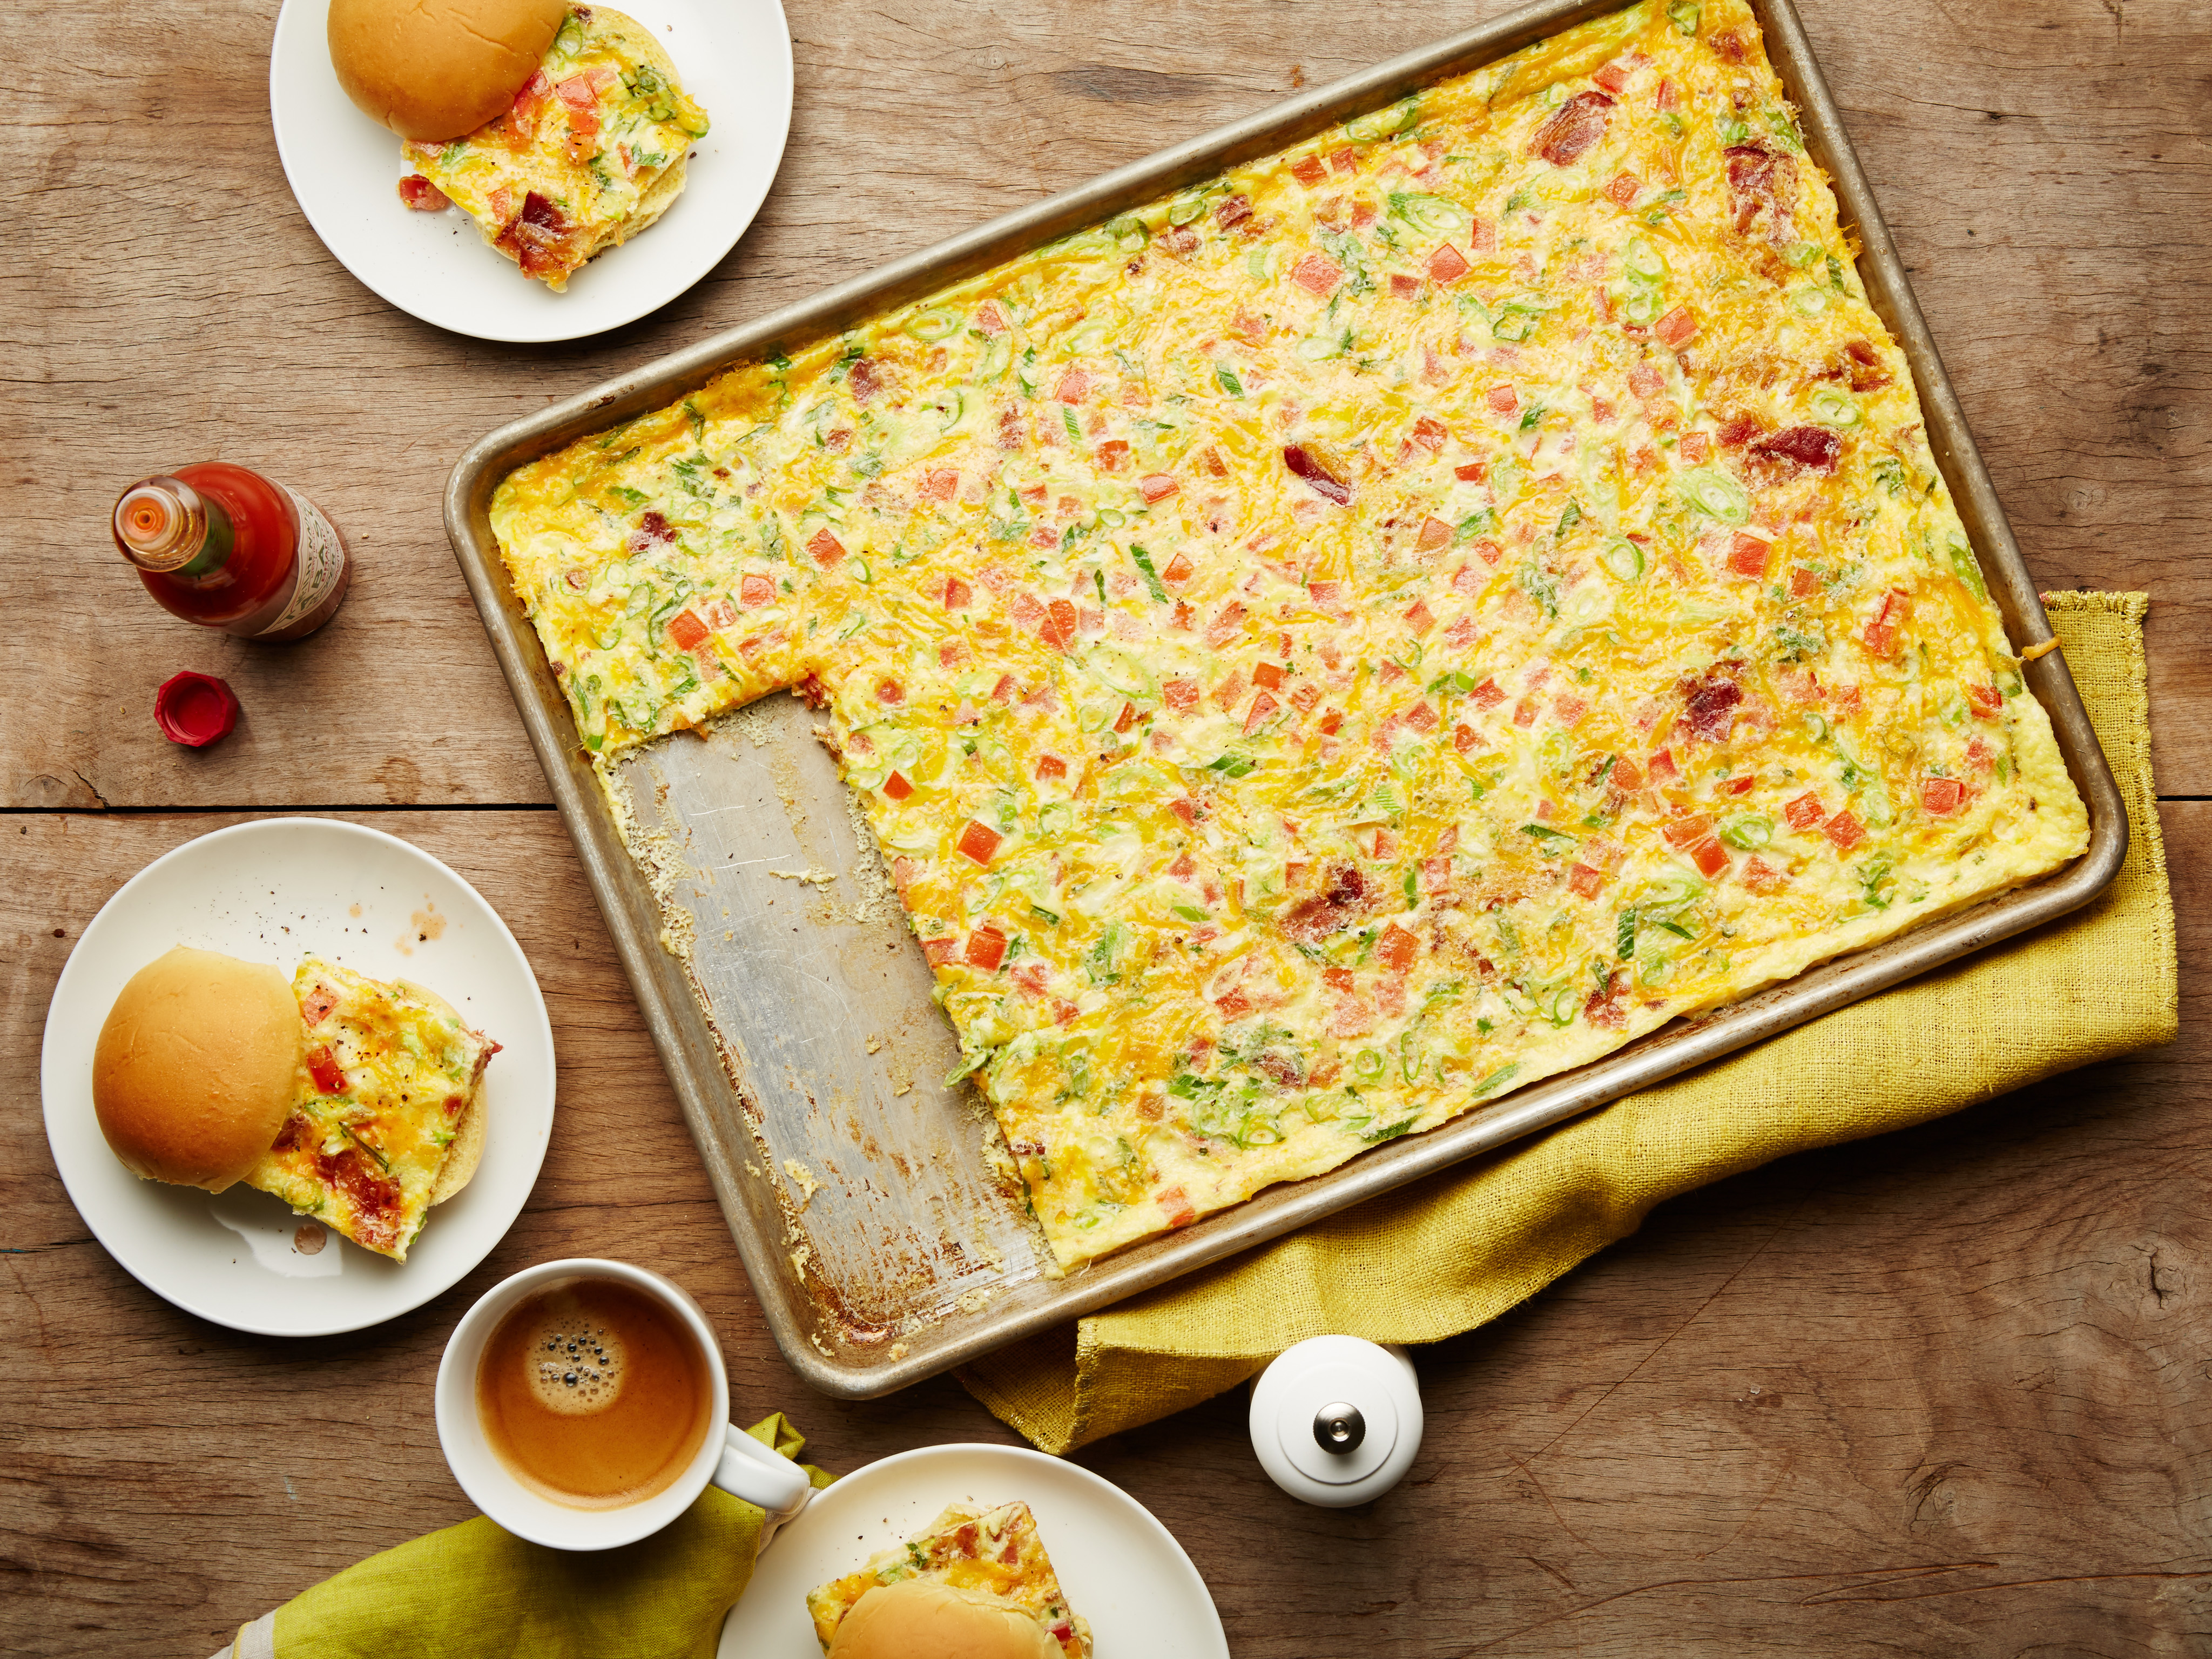 https://www.foodnetwork.com/content/dam/images/food/fullset/2016/12/4/2/FNK_Sheet-Pan-Bacon-Egg-Sandwiches-for-a-Crowd_s4x3.jpg